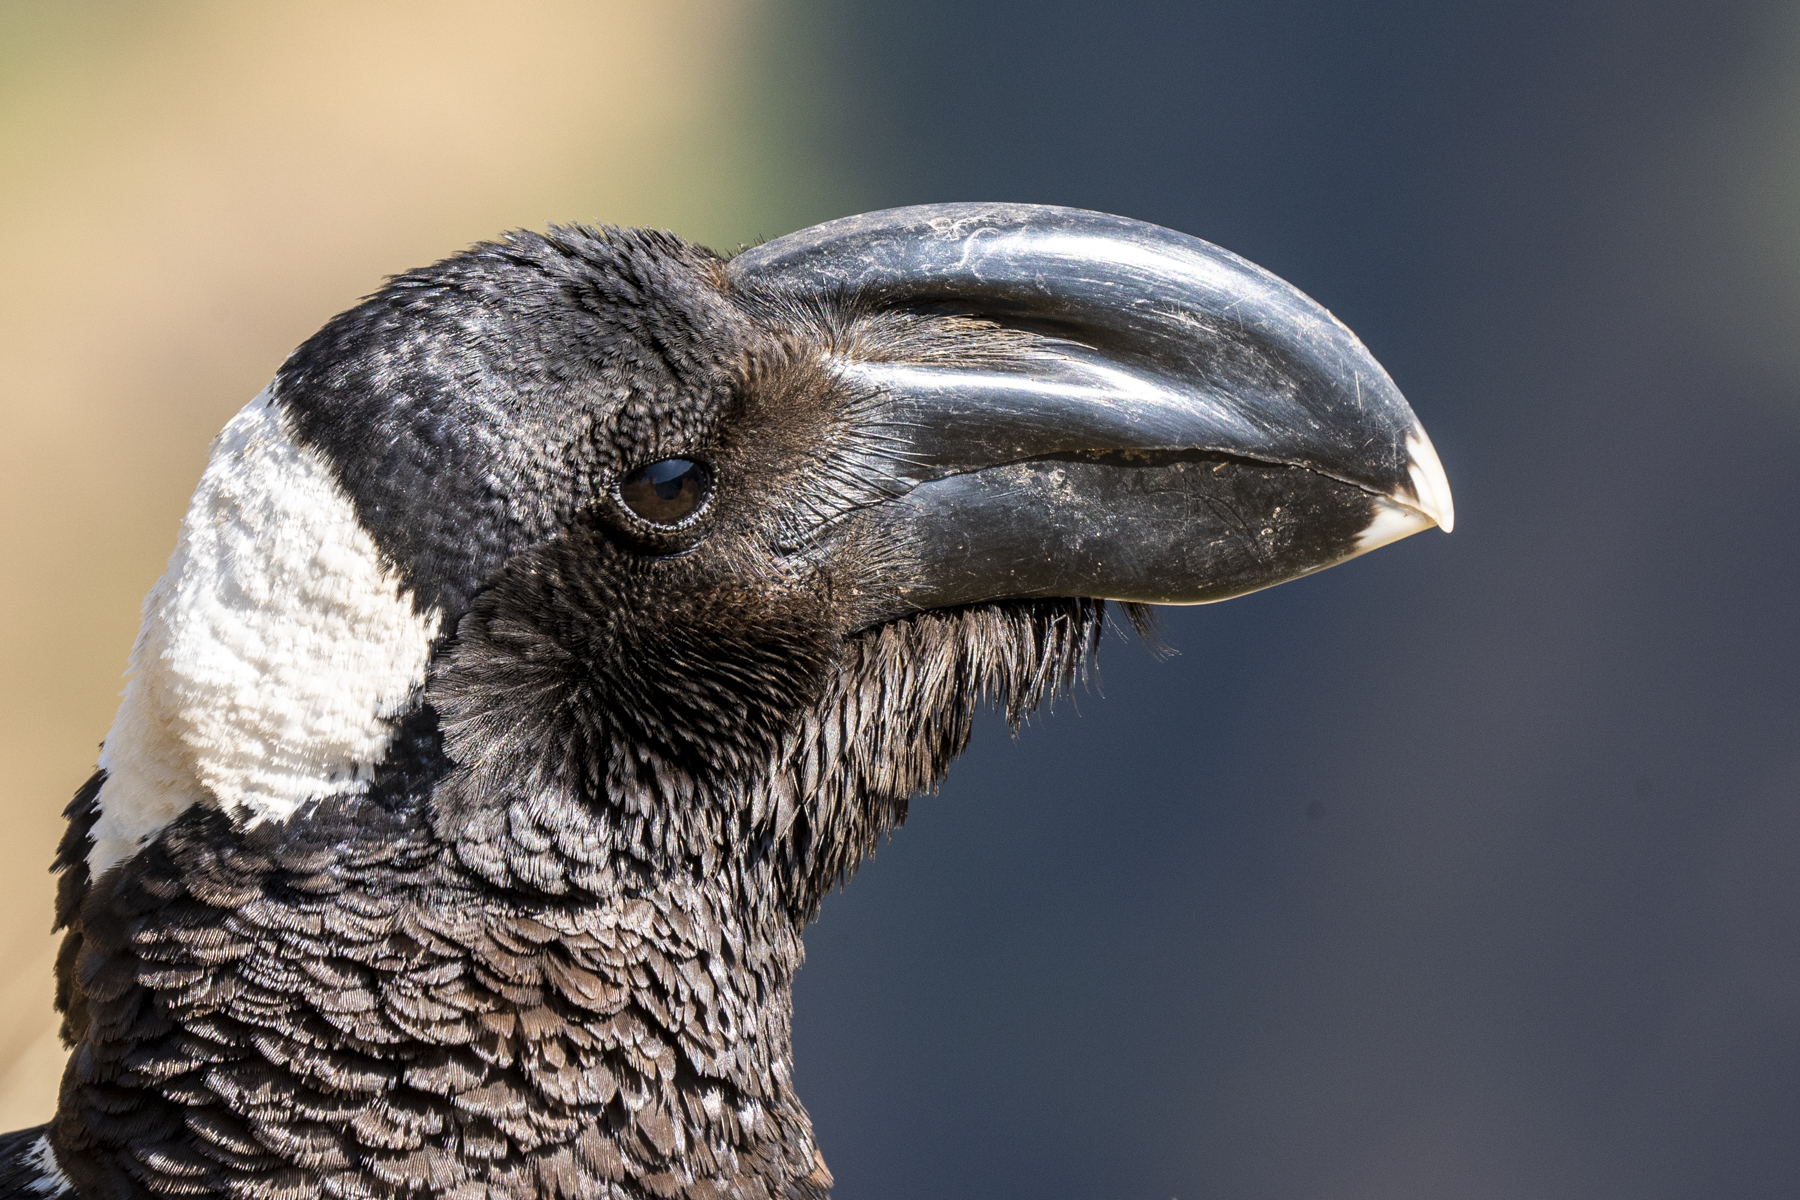 Thick-billed Raven portrait on our Ethiopia wildlife photography tour (image by Mark Beaman)